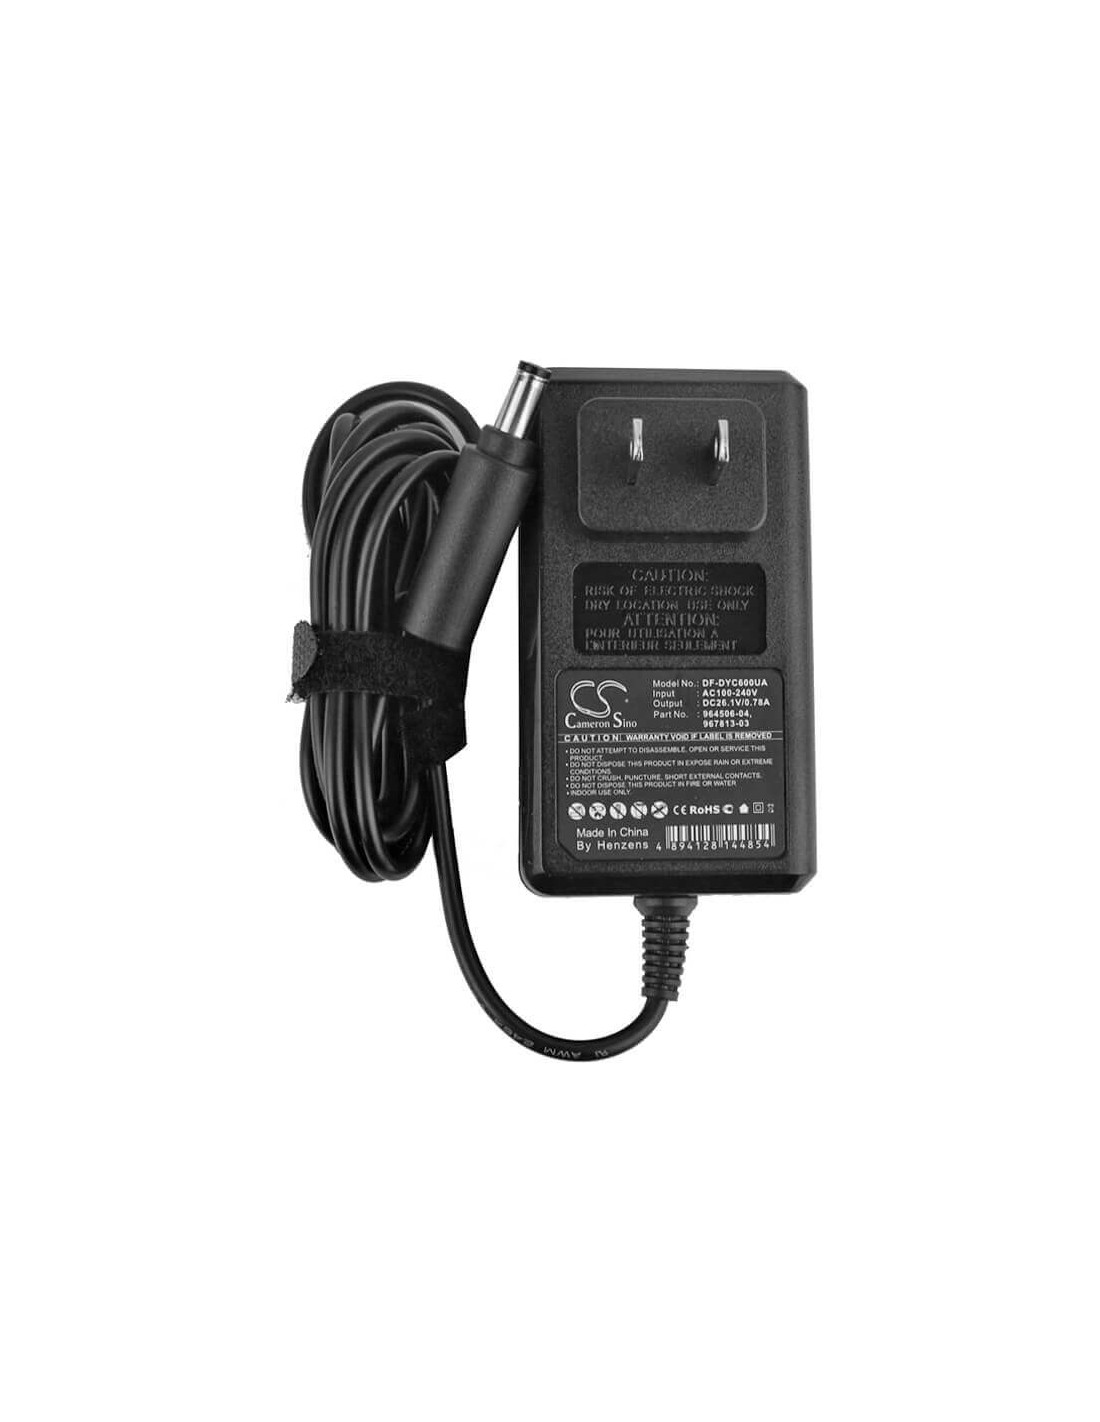 Battery Charger for Dyson, Dc58, Dc59, Dc59 Animal & Others